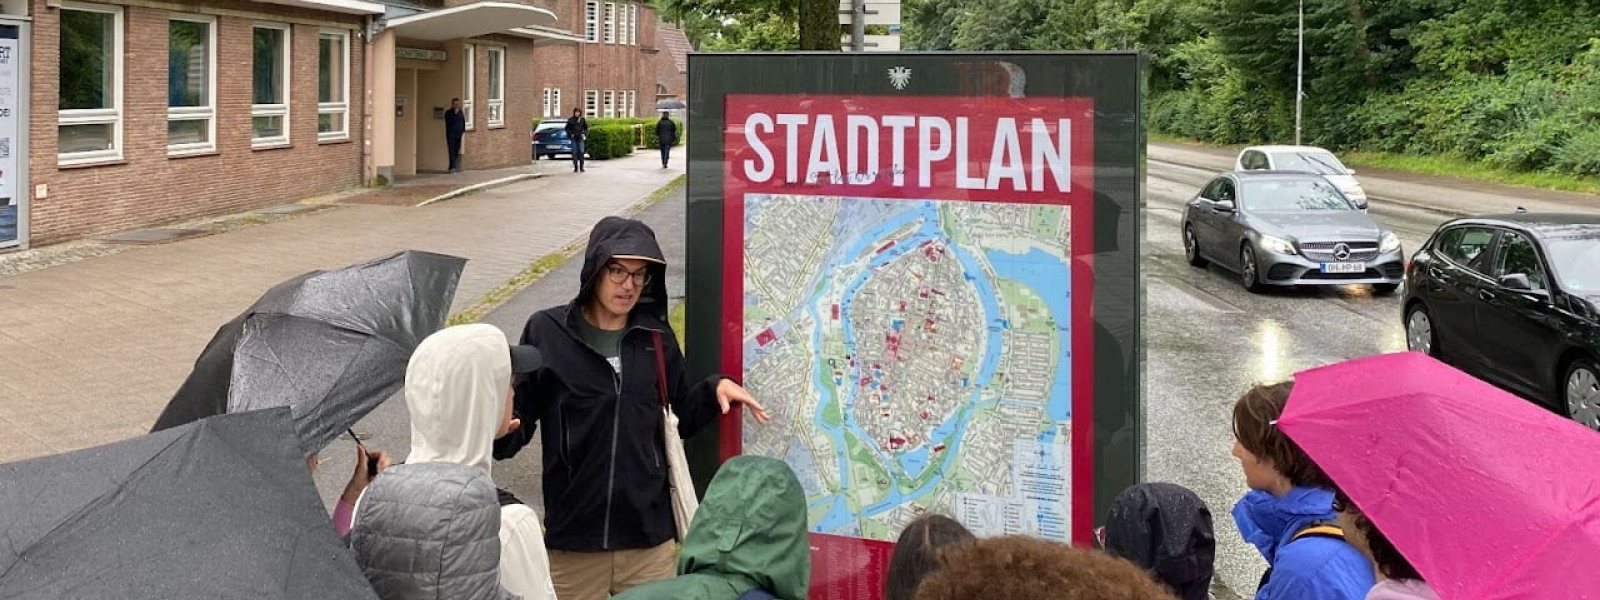 The group gathers outdoors around the professor, who is speaking while standing next to a map. Many of the participants are holding umbrellas. Behind them are a large brick building, trees, and a road with cars passing by.